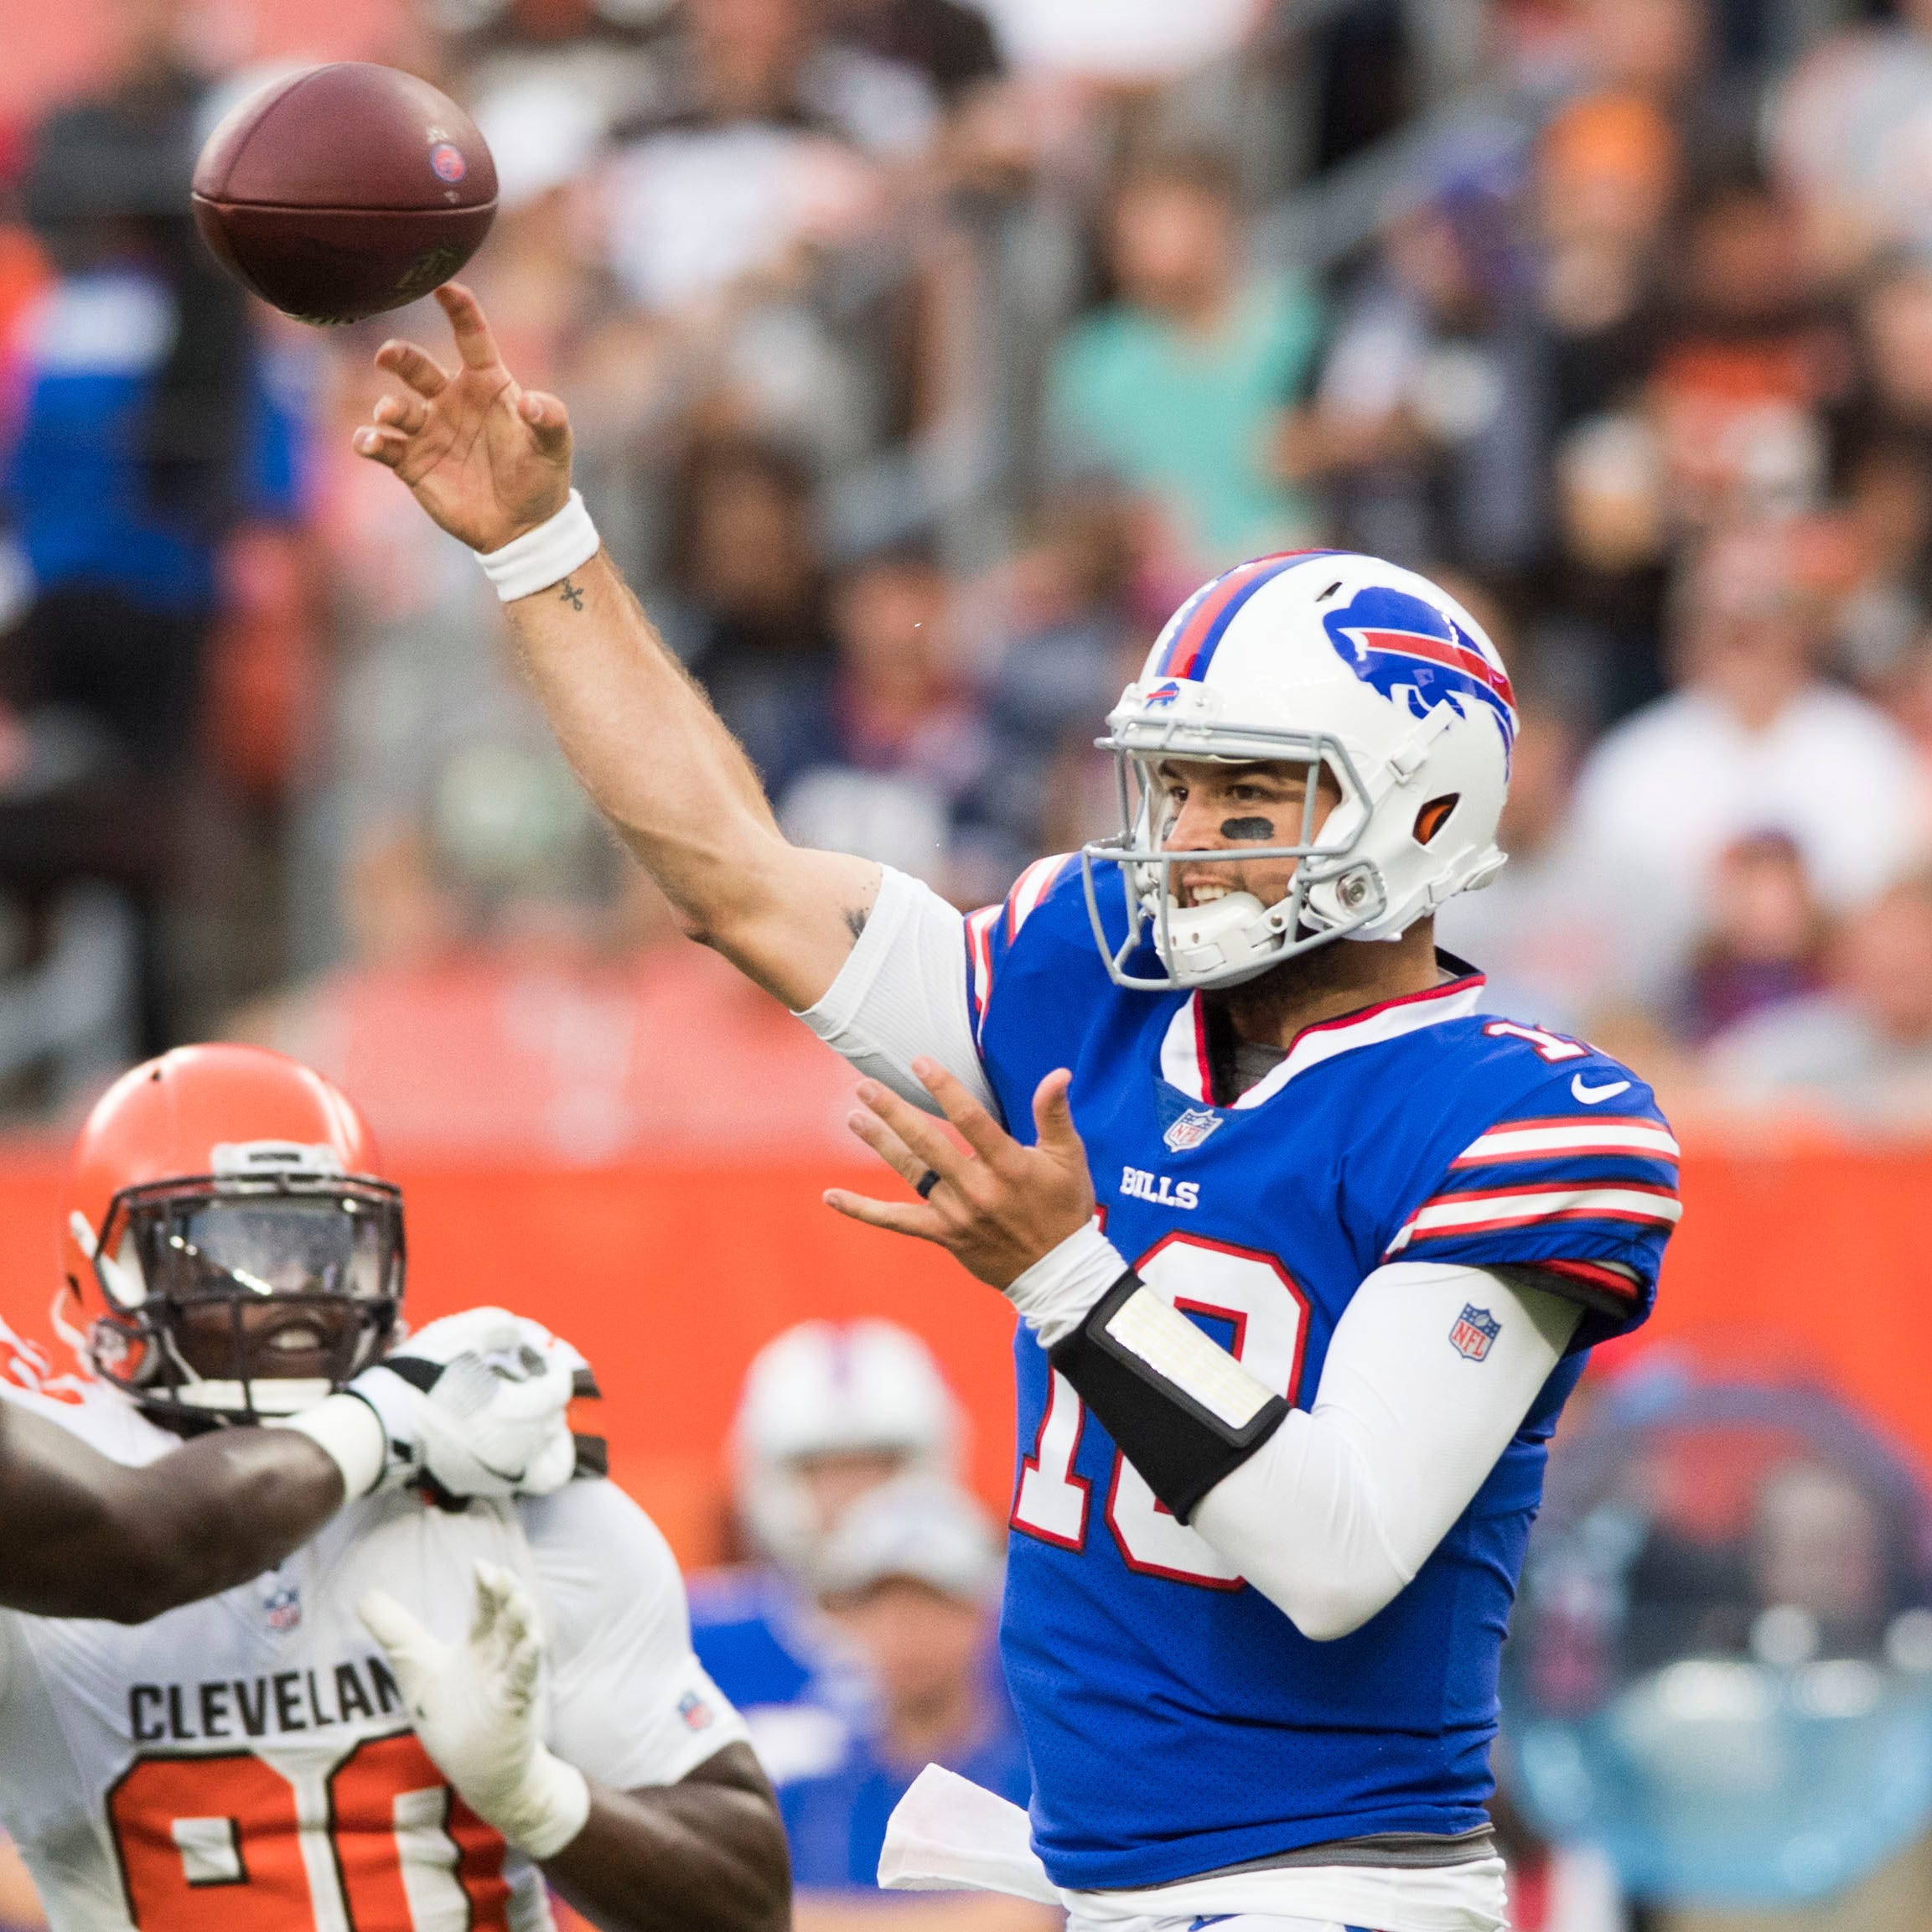 Buffalo Bills quarterback AJ McCarron (10) throws a pass during the first quarter against the Cleveland Browns at FirstEnergy Stadium.